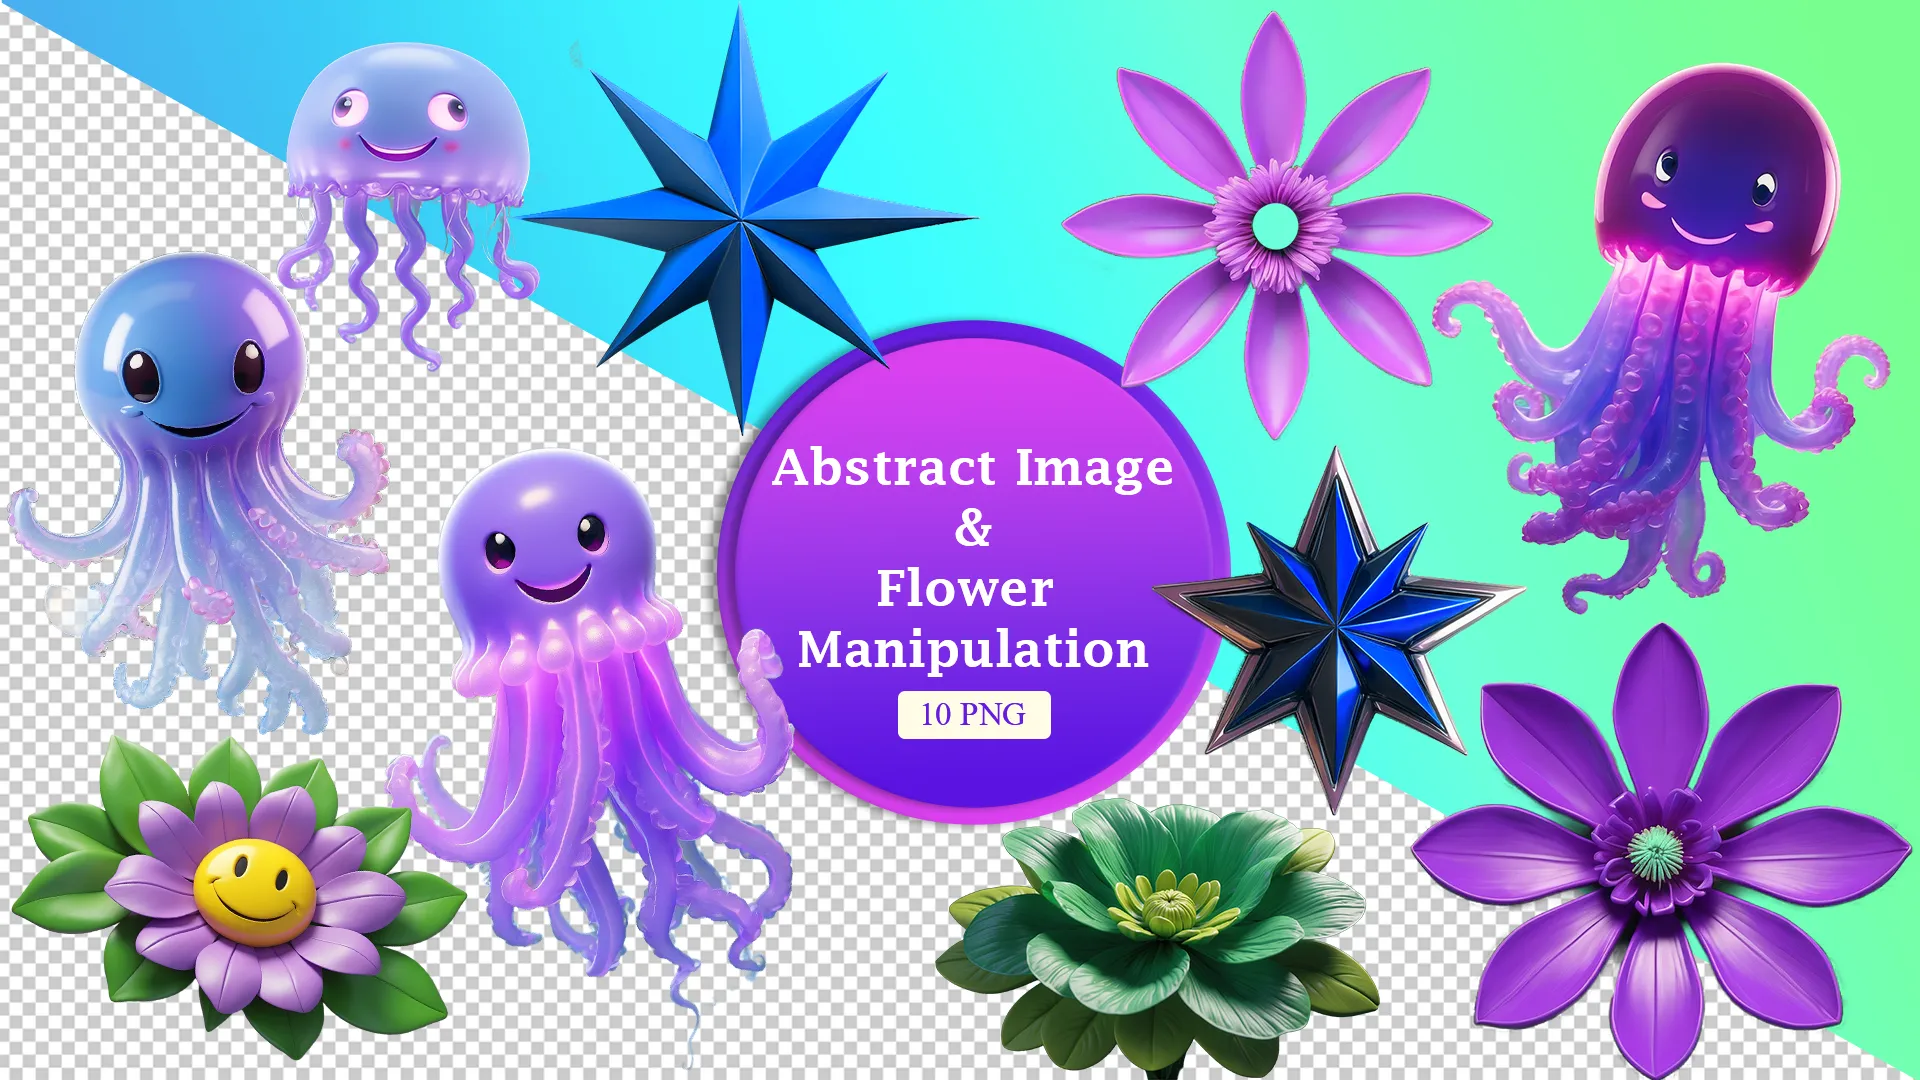 Enchanting Sea Creatures and Blossoms PNG Pack